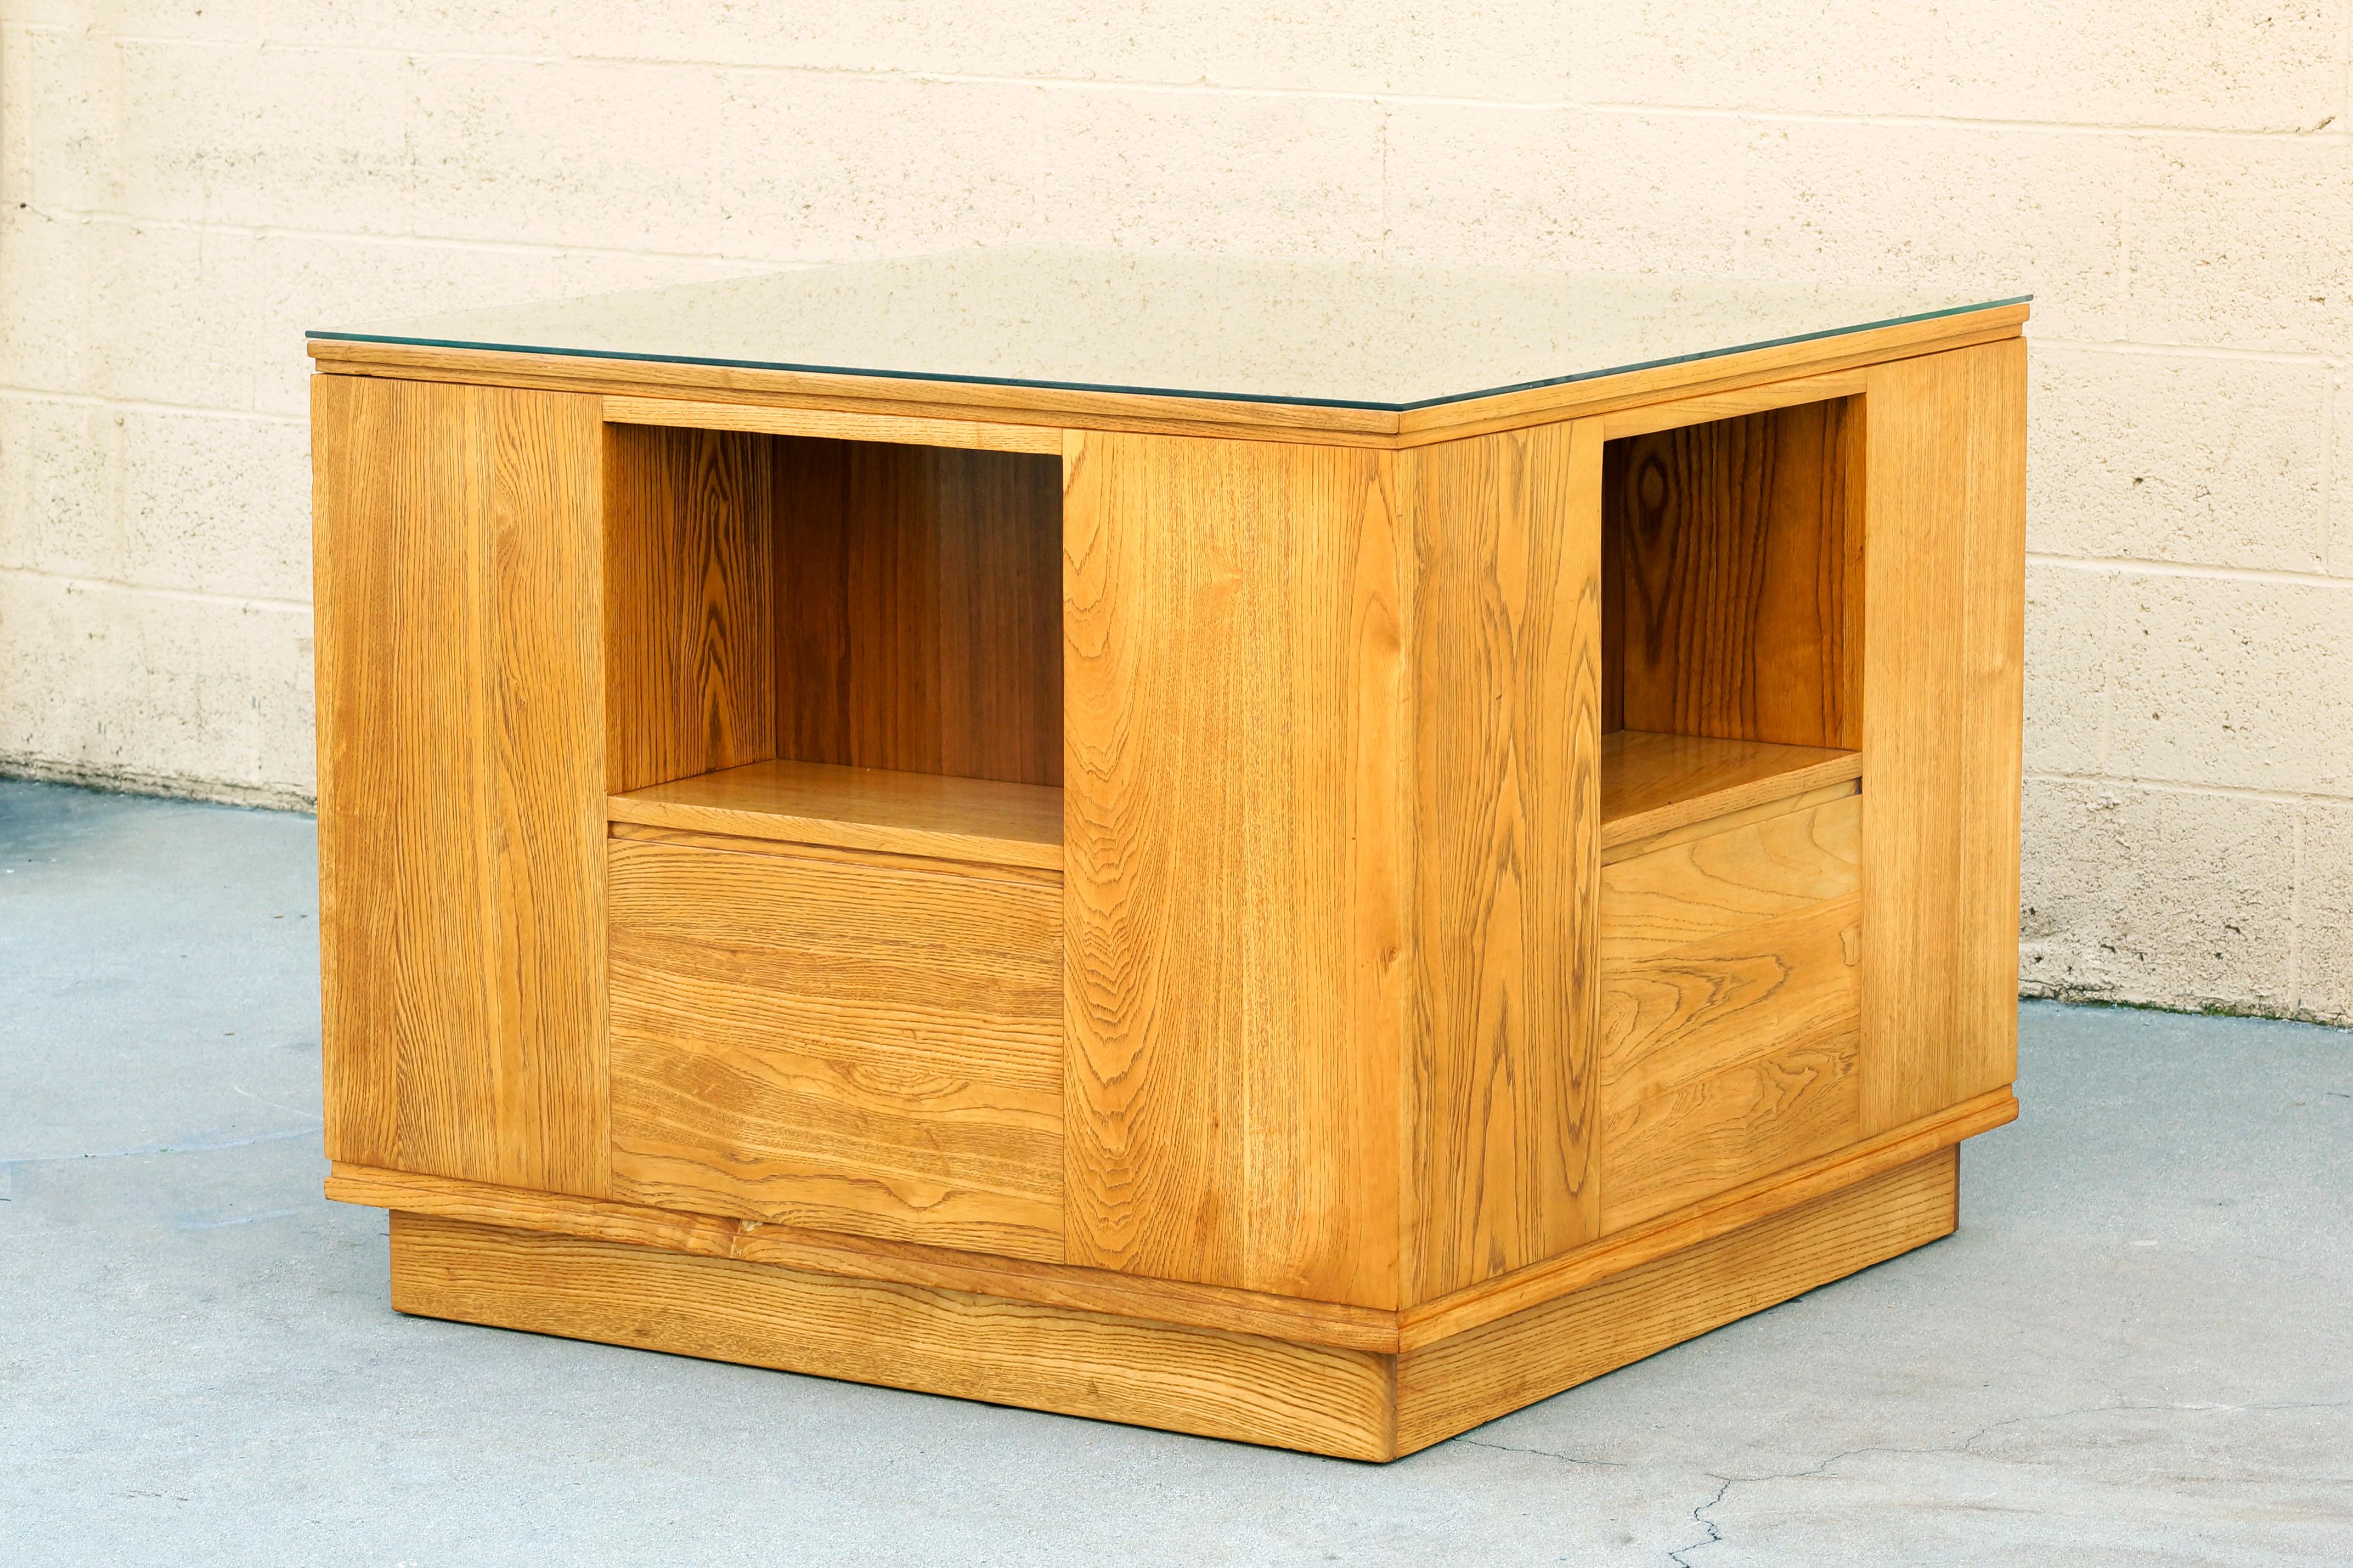 Absolutely wonderful modernist entryway table custom designed by Paul Frankl for a private Los Angeles residence, circa 1940s. Constructed of solid oak with a built-in display alcove on each face. Inset base elevates the cube off the ground.